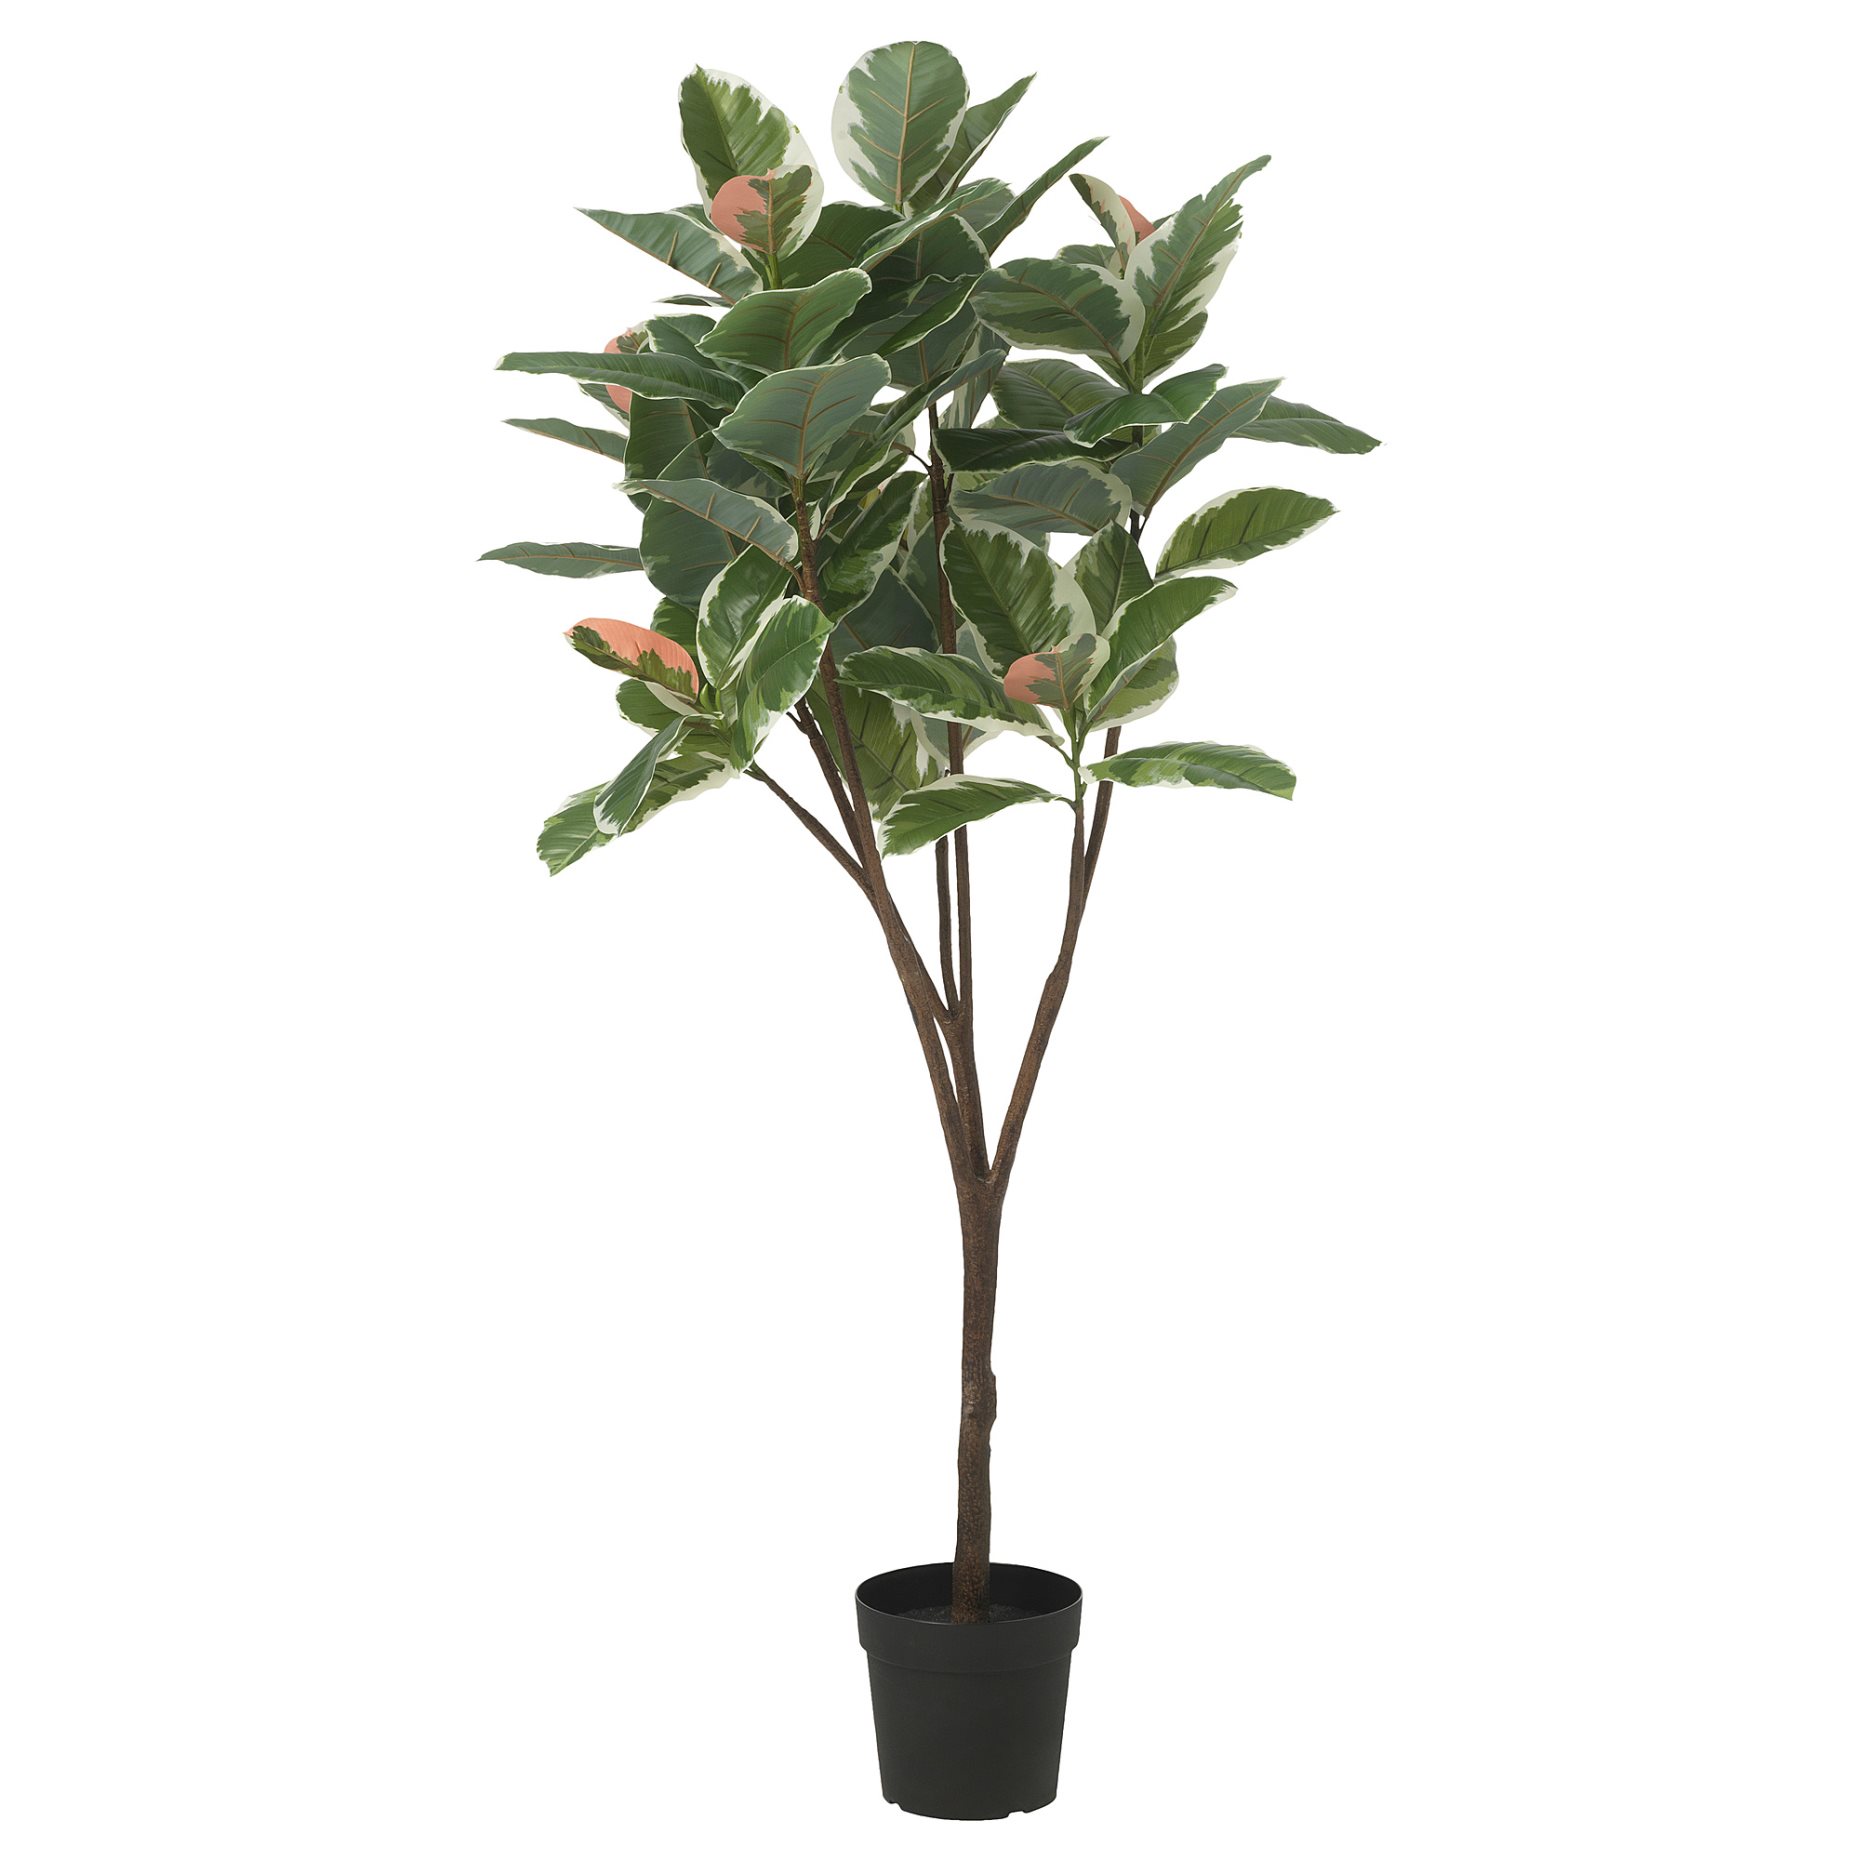 FEJKA, artificial potted plant/in/outdoor/Rubber plant, 23 cm, 605.483.13